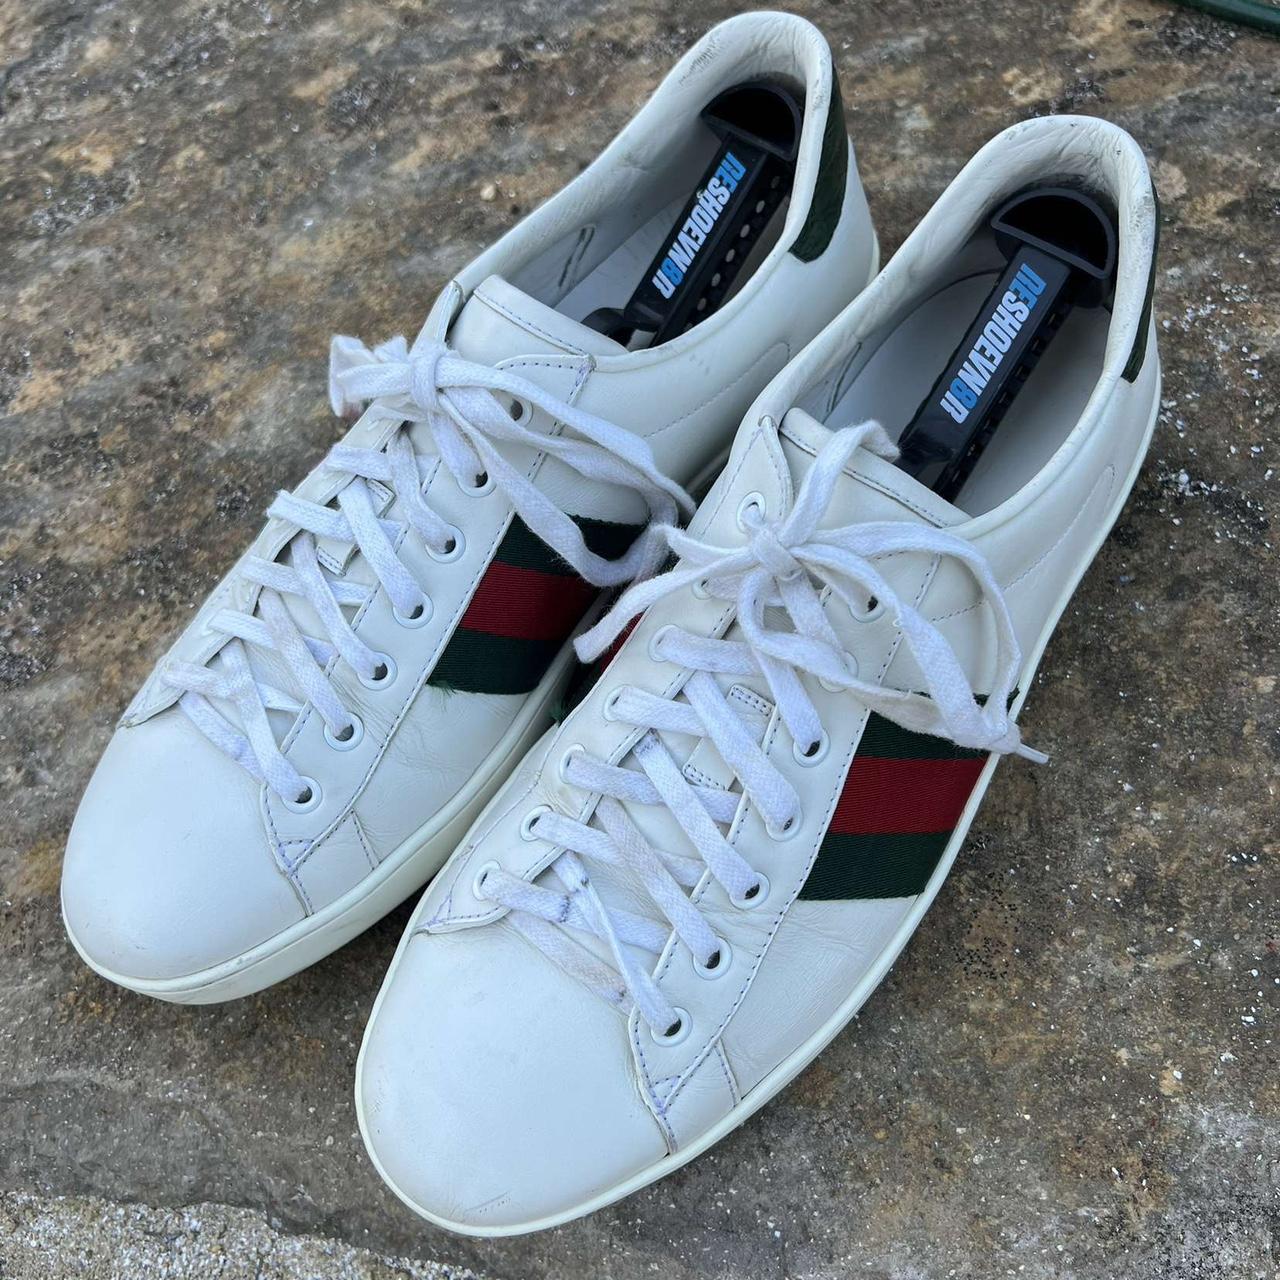 USED Gucci Aces - Fits size 11 to 11.5 - HAS MISSING... - Depop